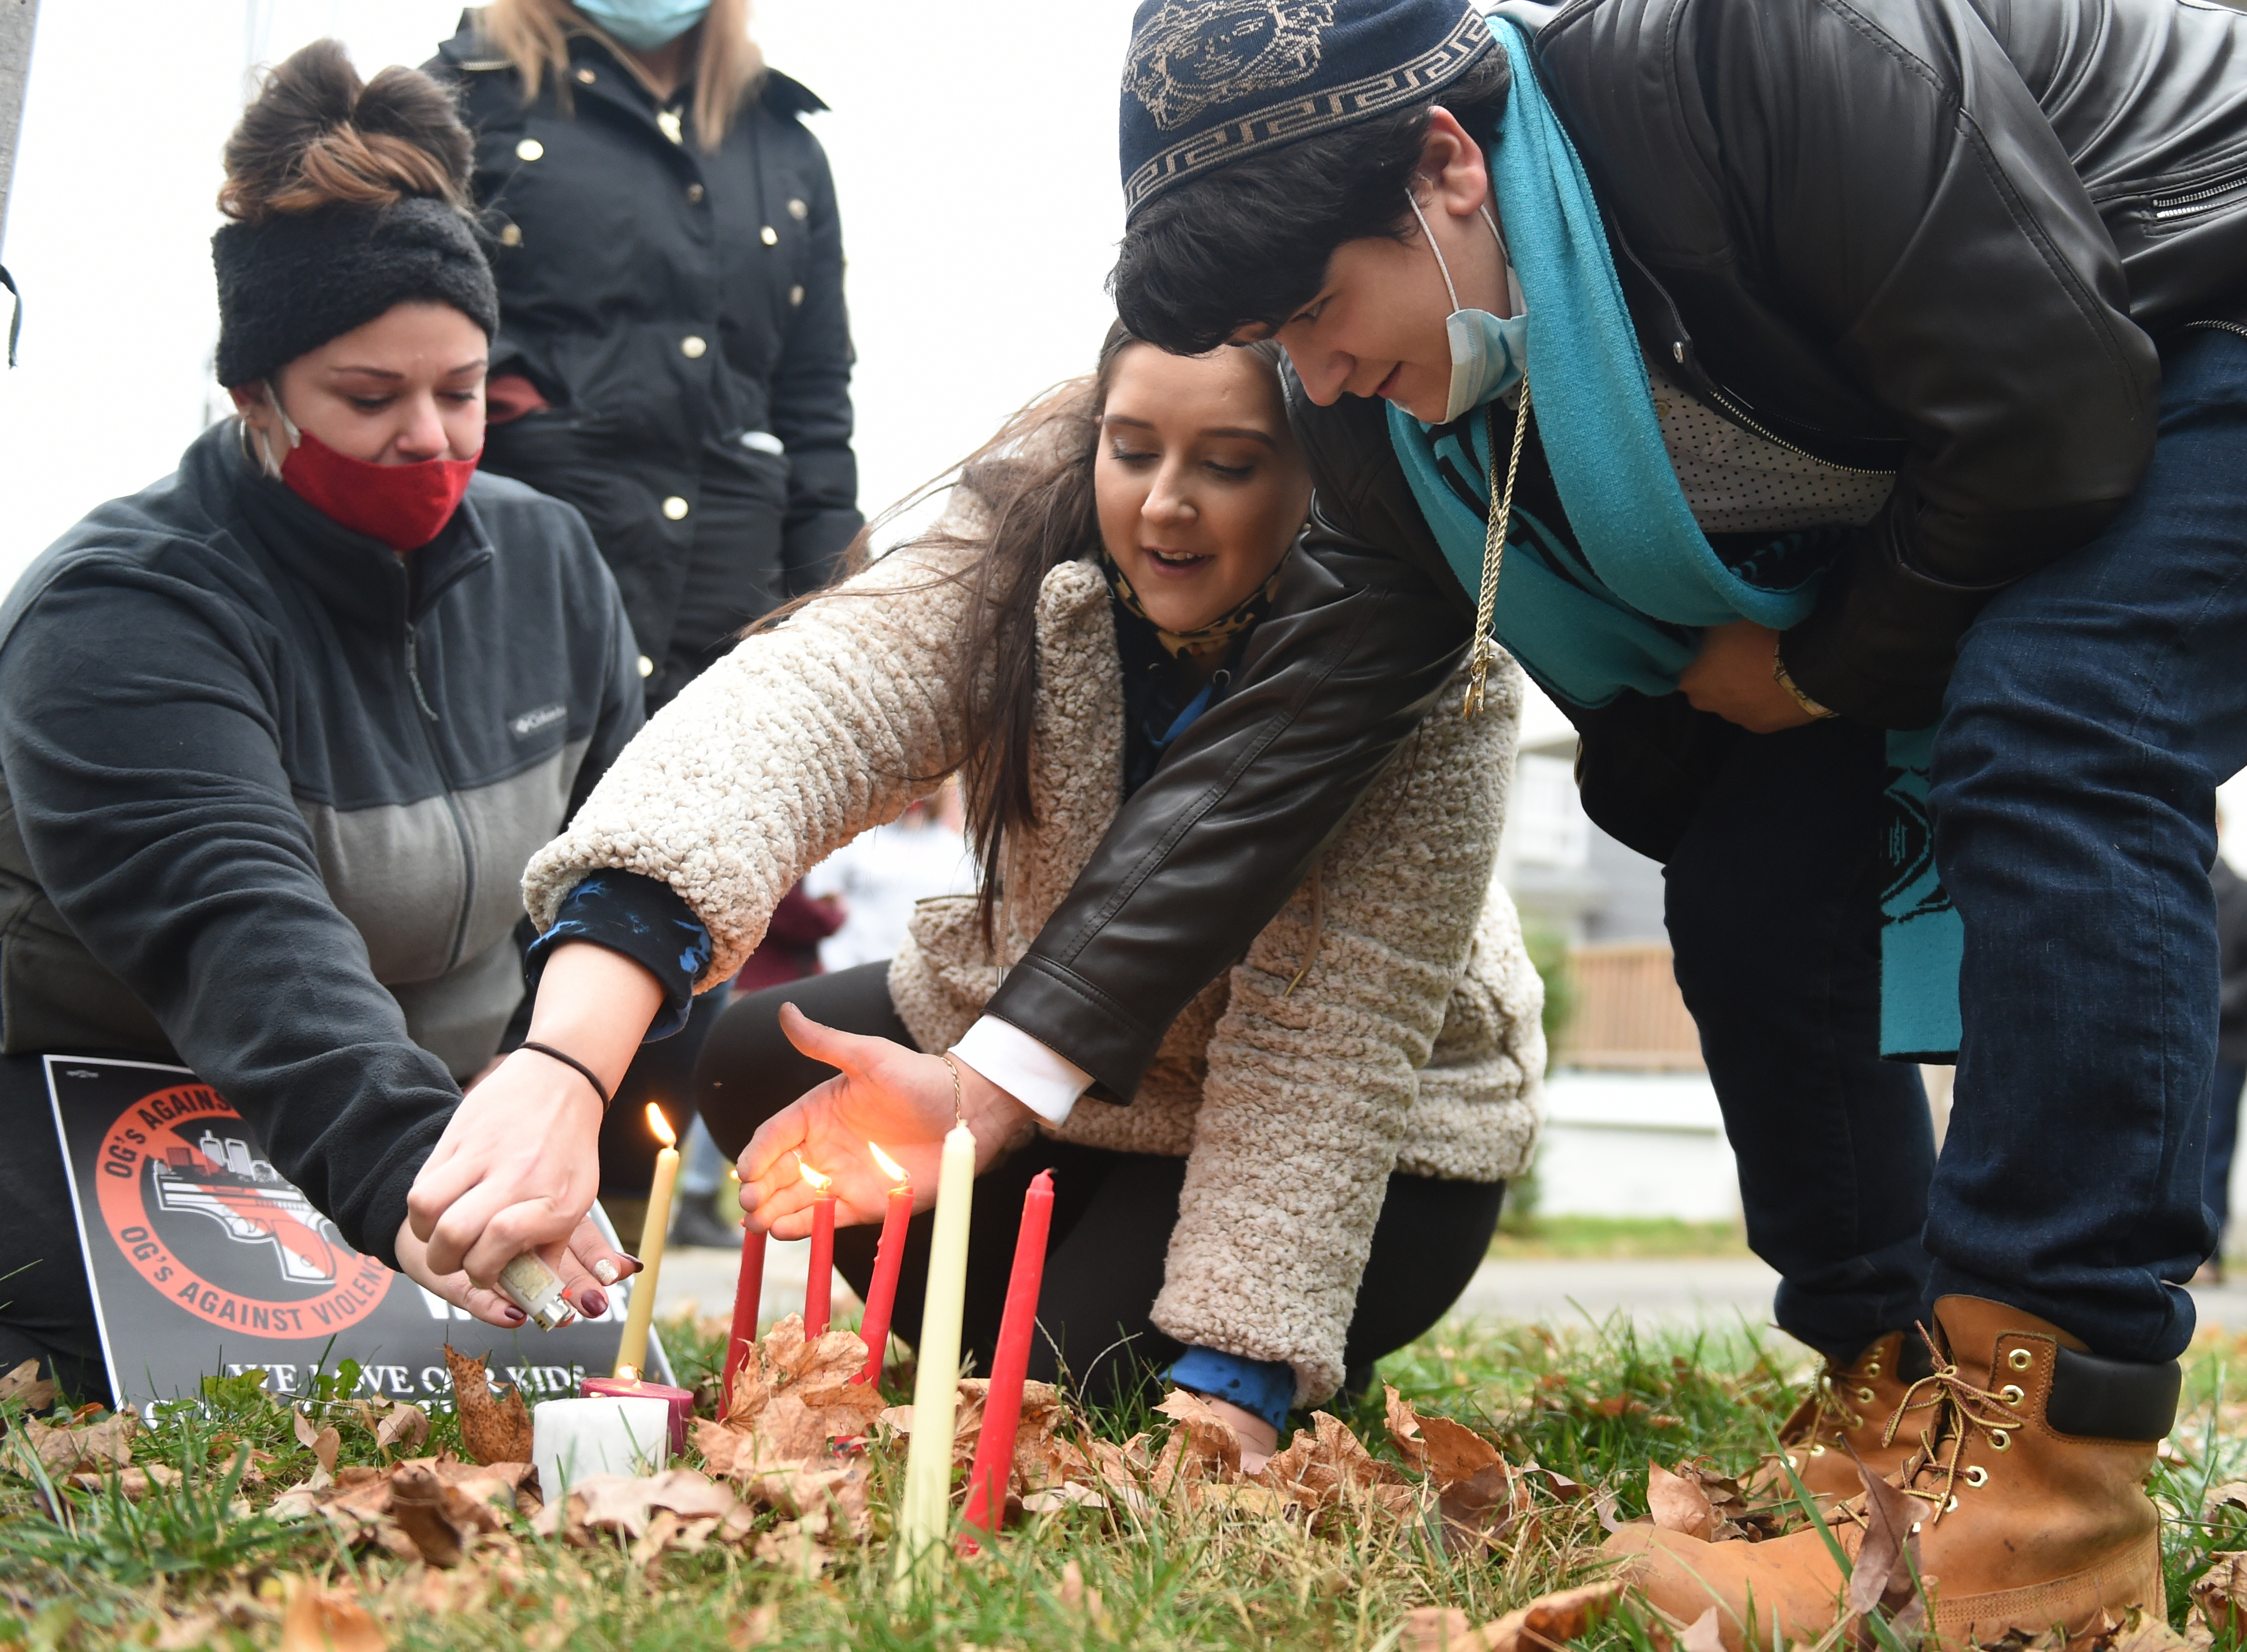 Cousin Briana Edwards, left, girlfriend Sydney Talarico, center, and friend Christian Talarico light candles to remember Jerry Murray who was murdered Wednesday November 9th, Judson Street, Syracuse, N.Y., Saturday, November 21, 2020.